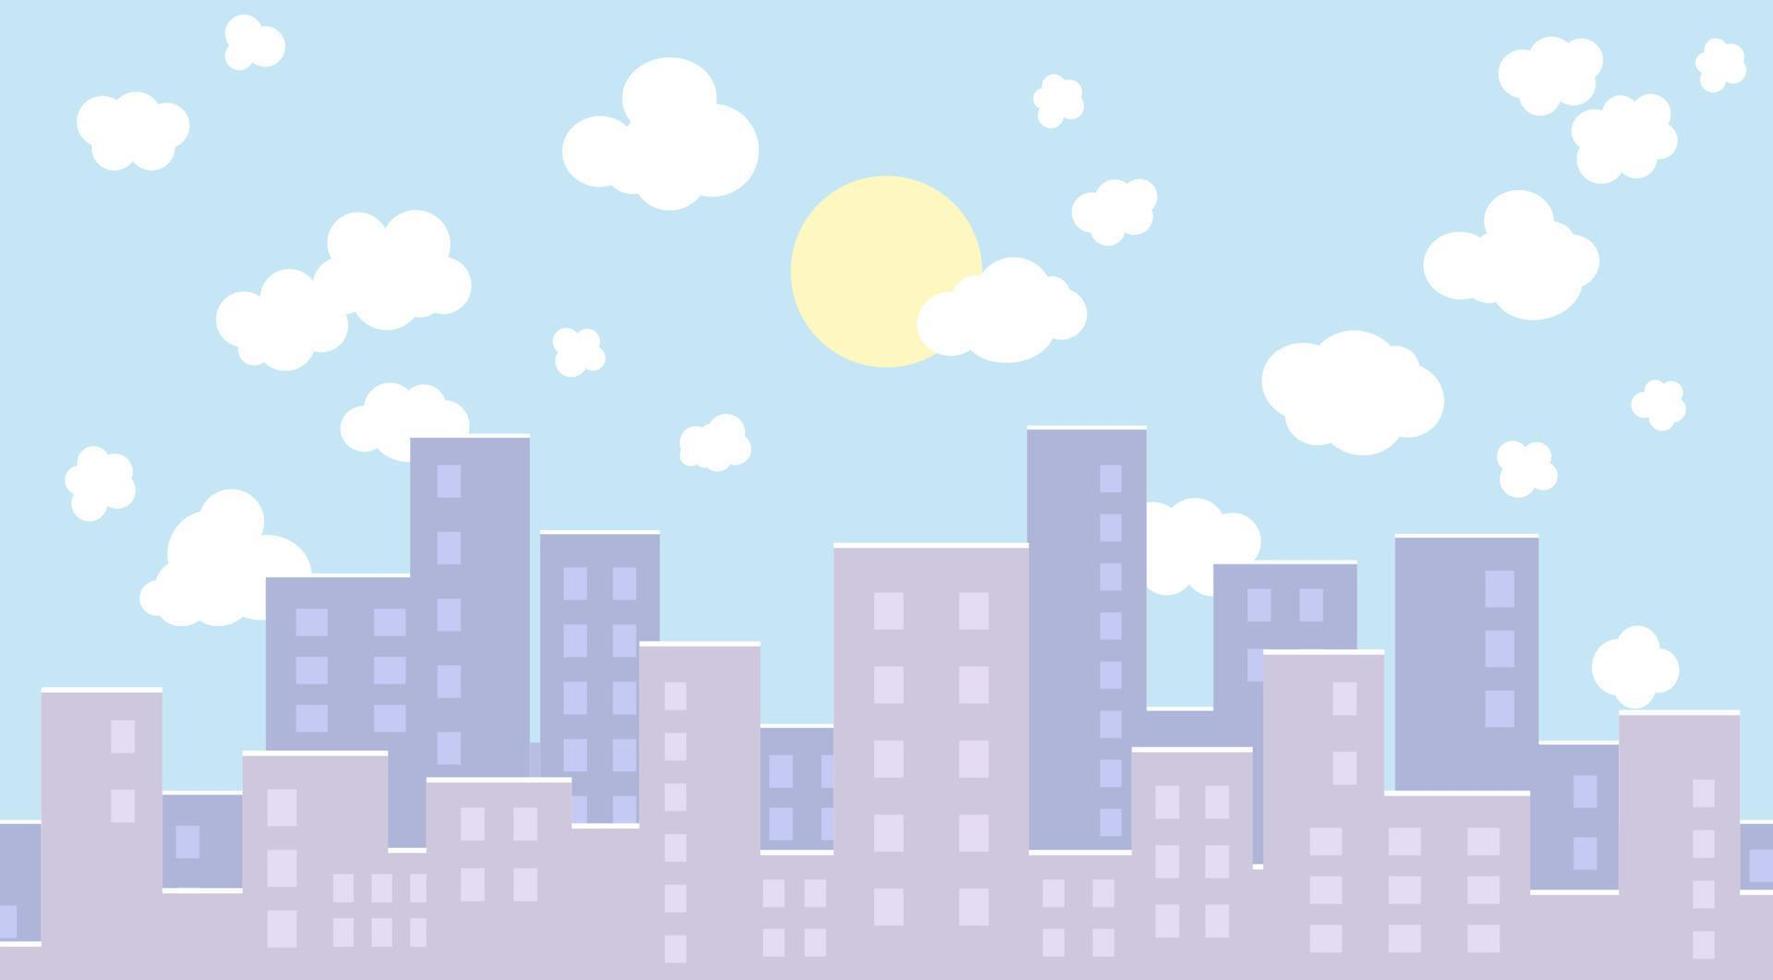 Concept from the background of the city in flat style for printing and decoration. Vector illustration.